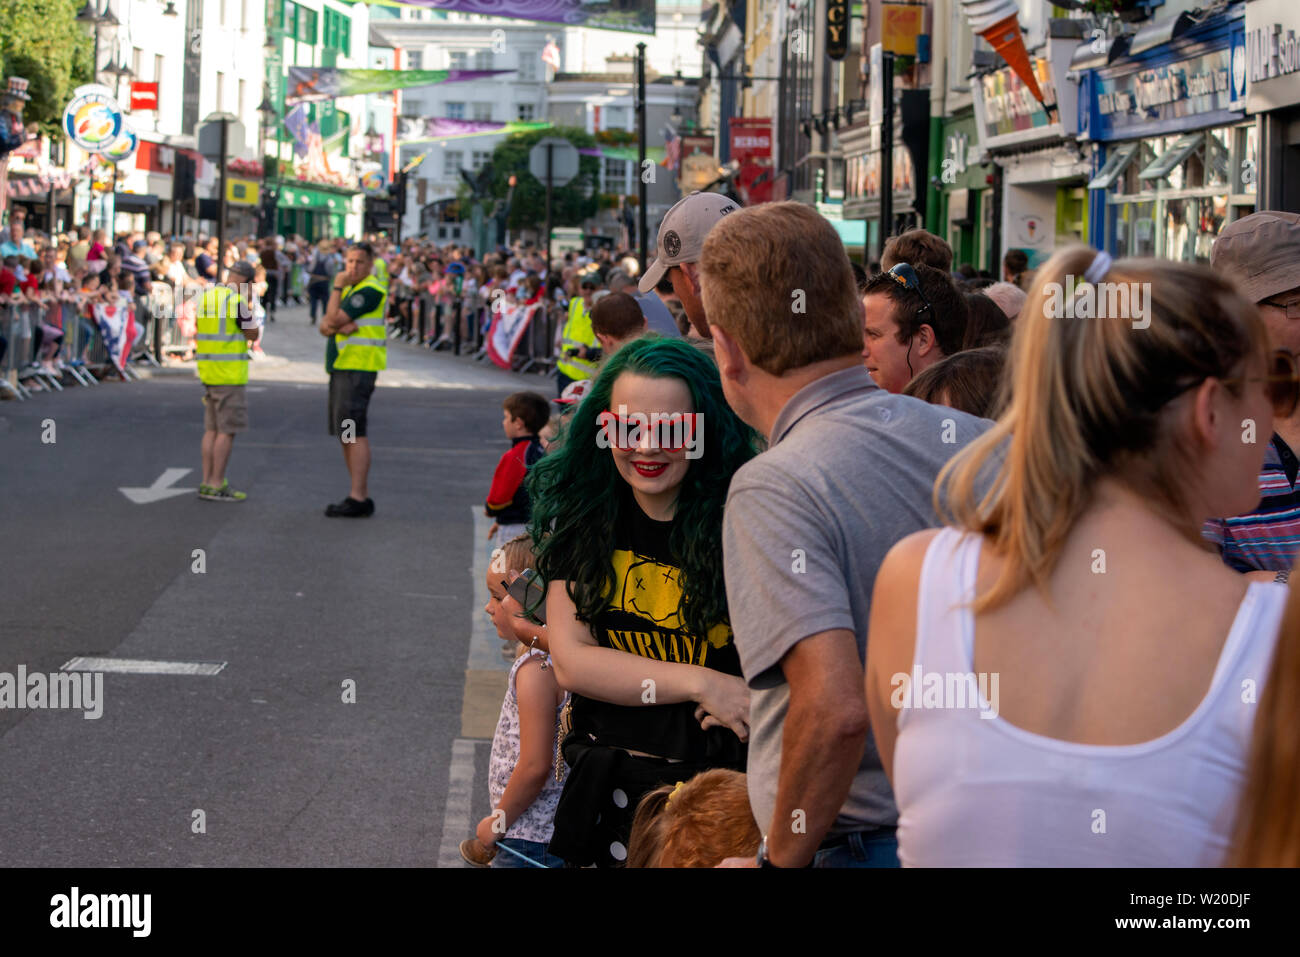 Spectators on High Street in Killarney, County Kerry, Ireland expecting the Parade for the 4th of July and Independence Day celebrations Stock Photo